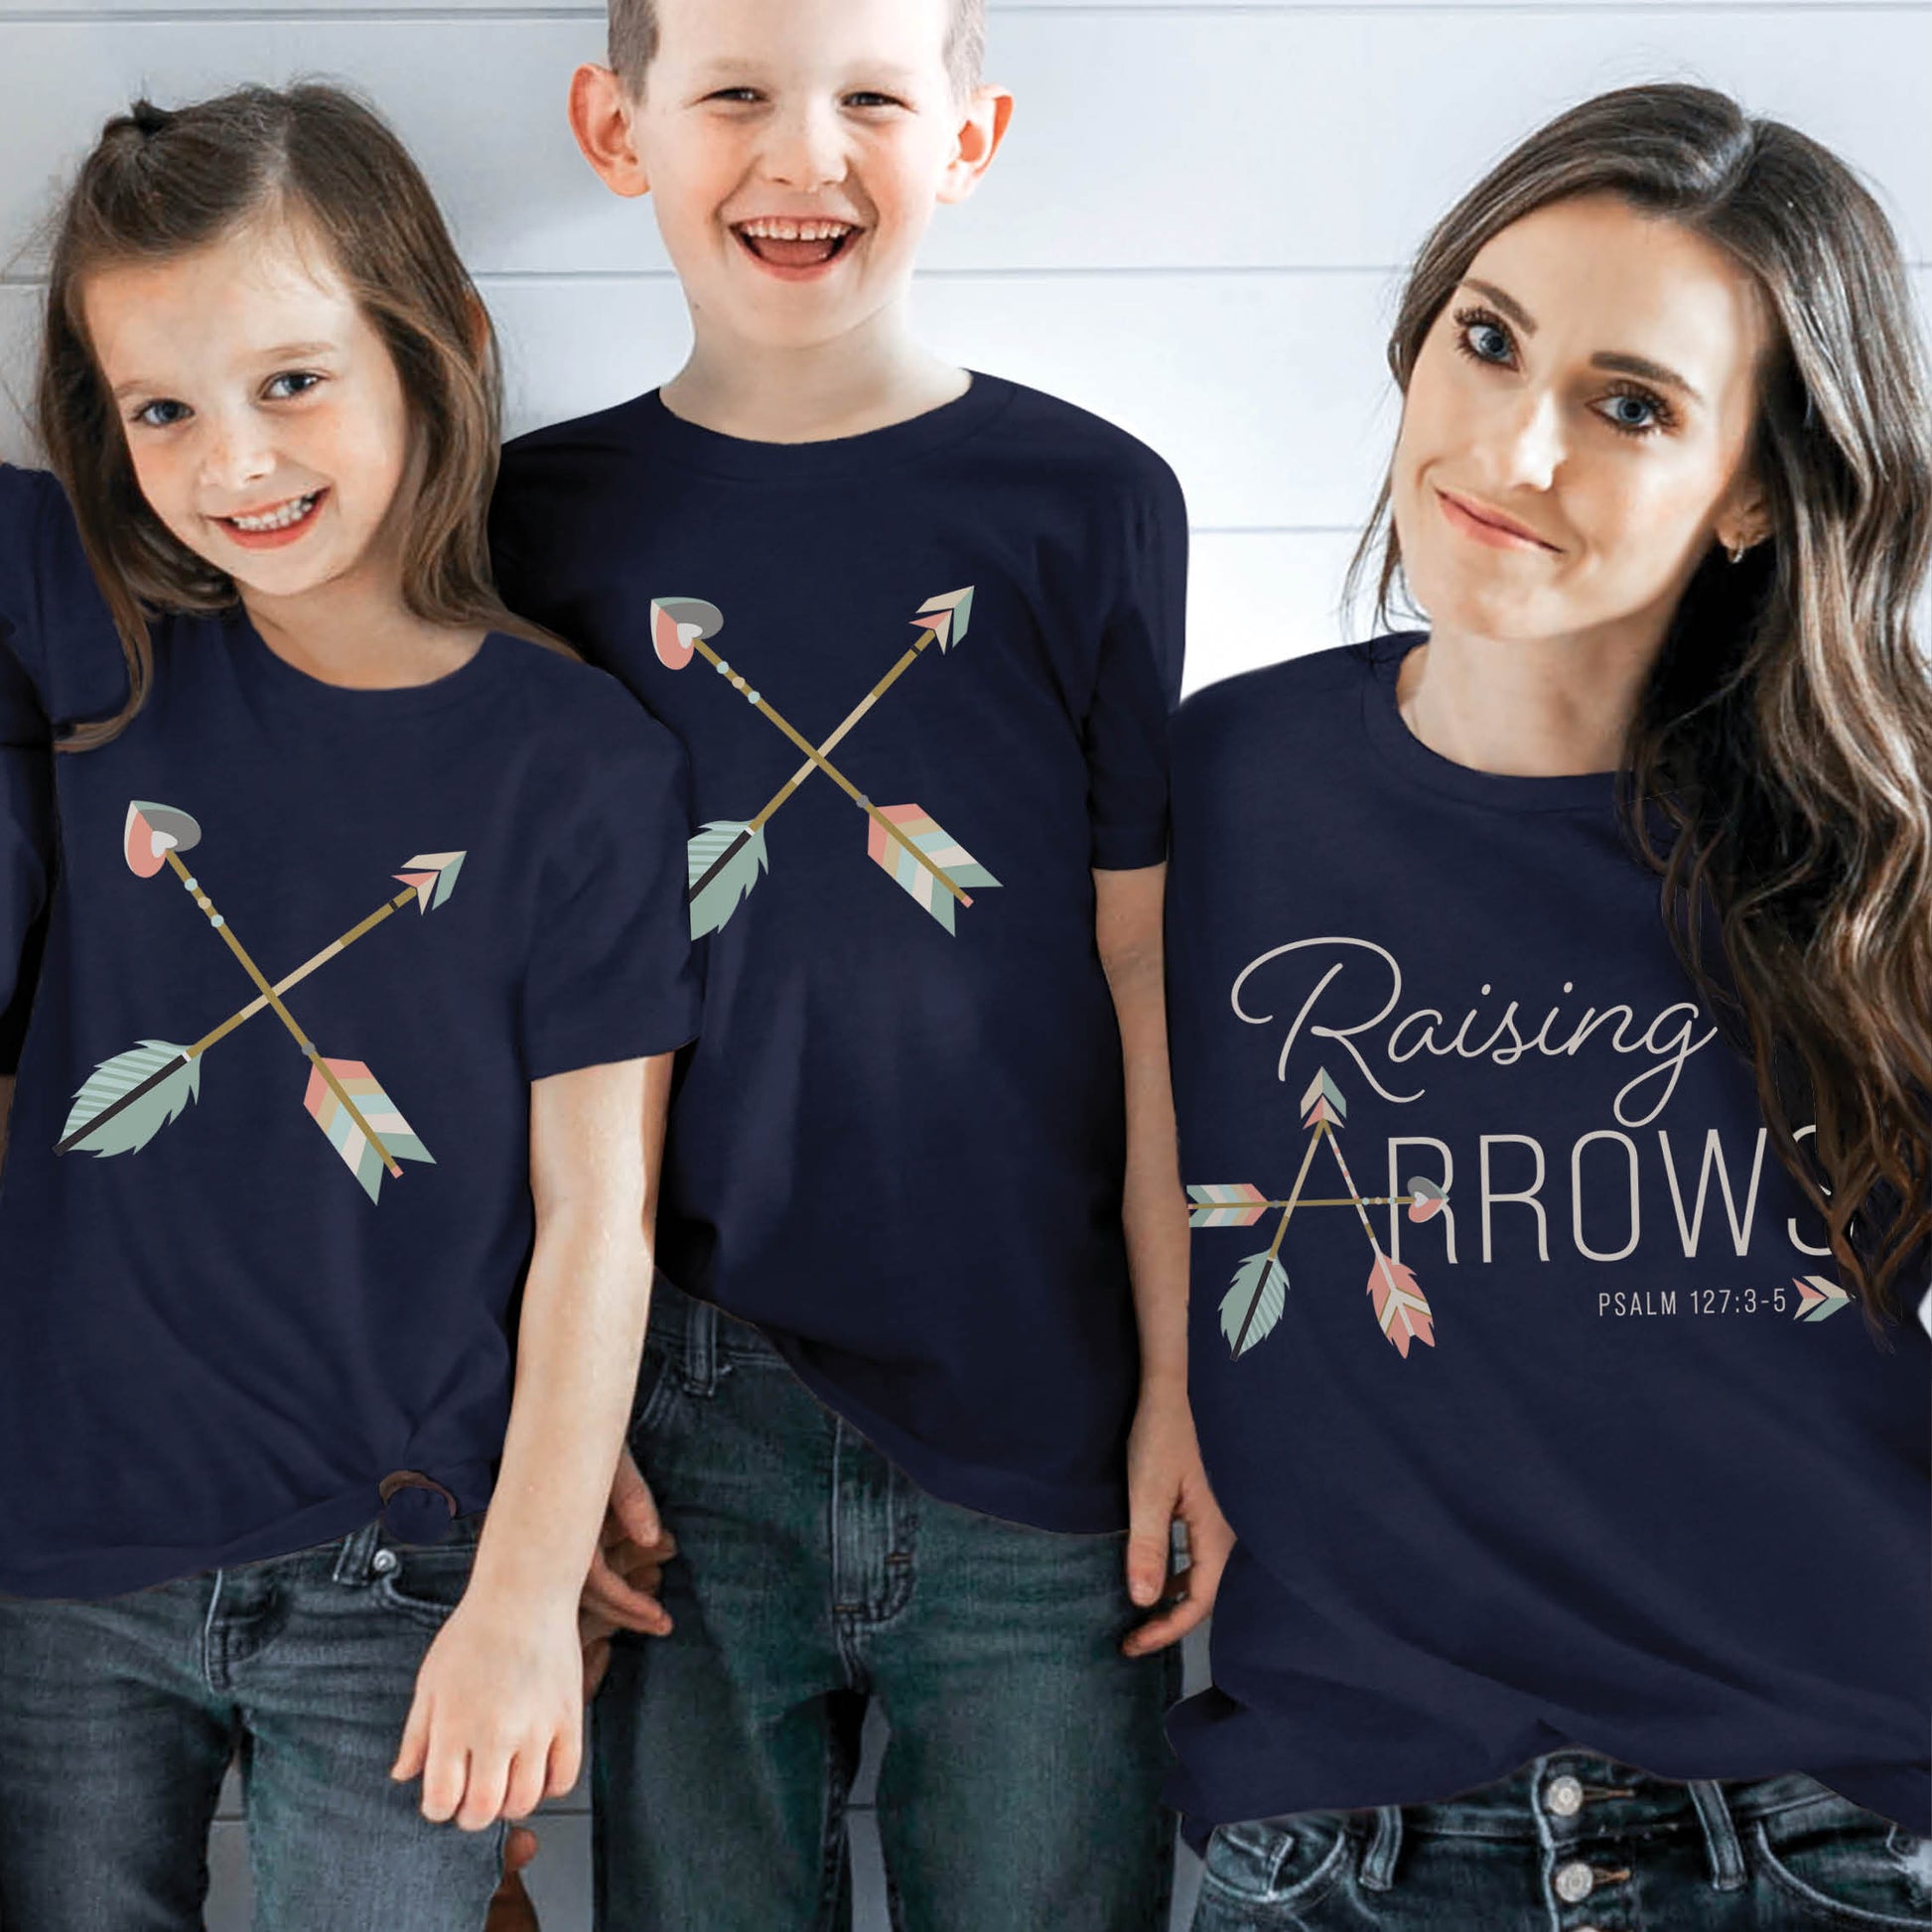 Youth kids size navy blue boho crisscross arrows Christian faith-based scripture t-shirt, matching mommy-and-me women's Mom homeschool family tee